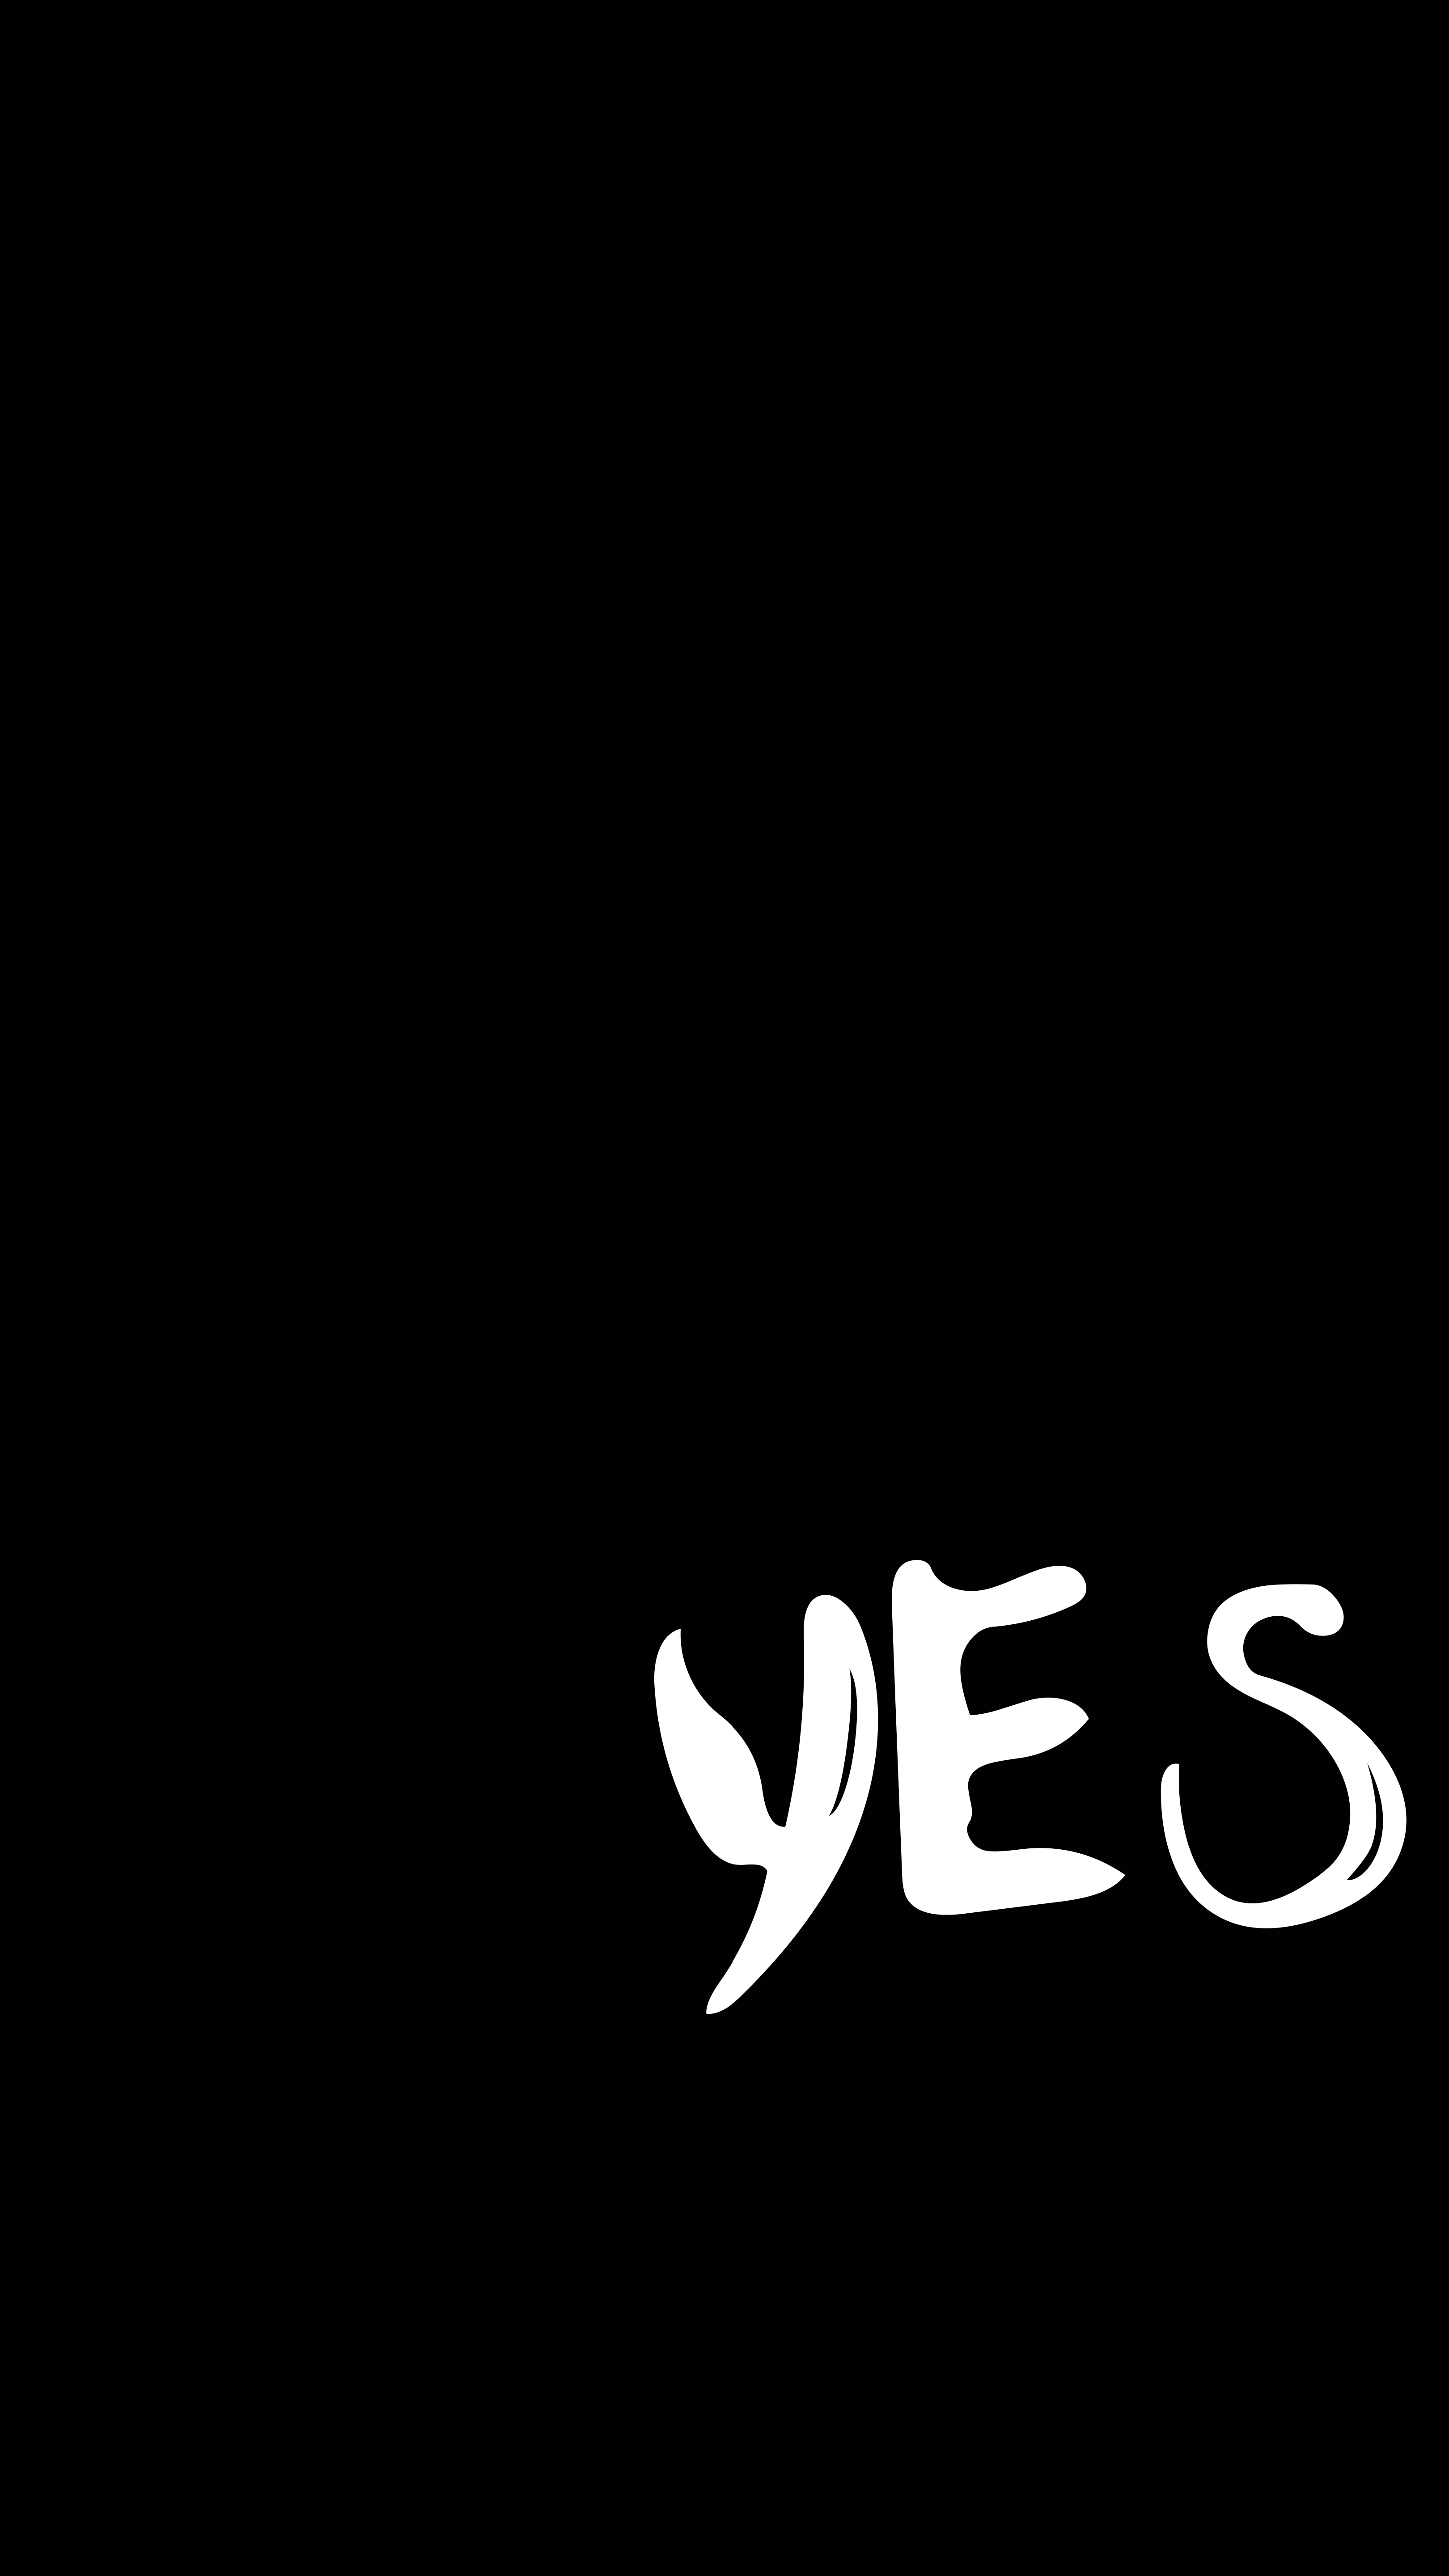 Download Inspiring Yes or Yes Calligraphy Art Wallpaper  Wallpaperscom